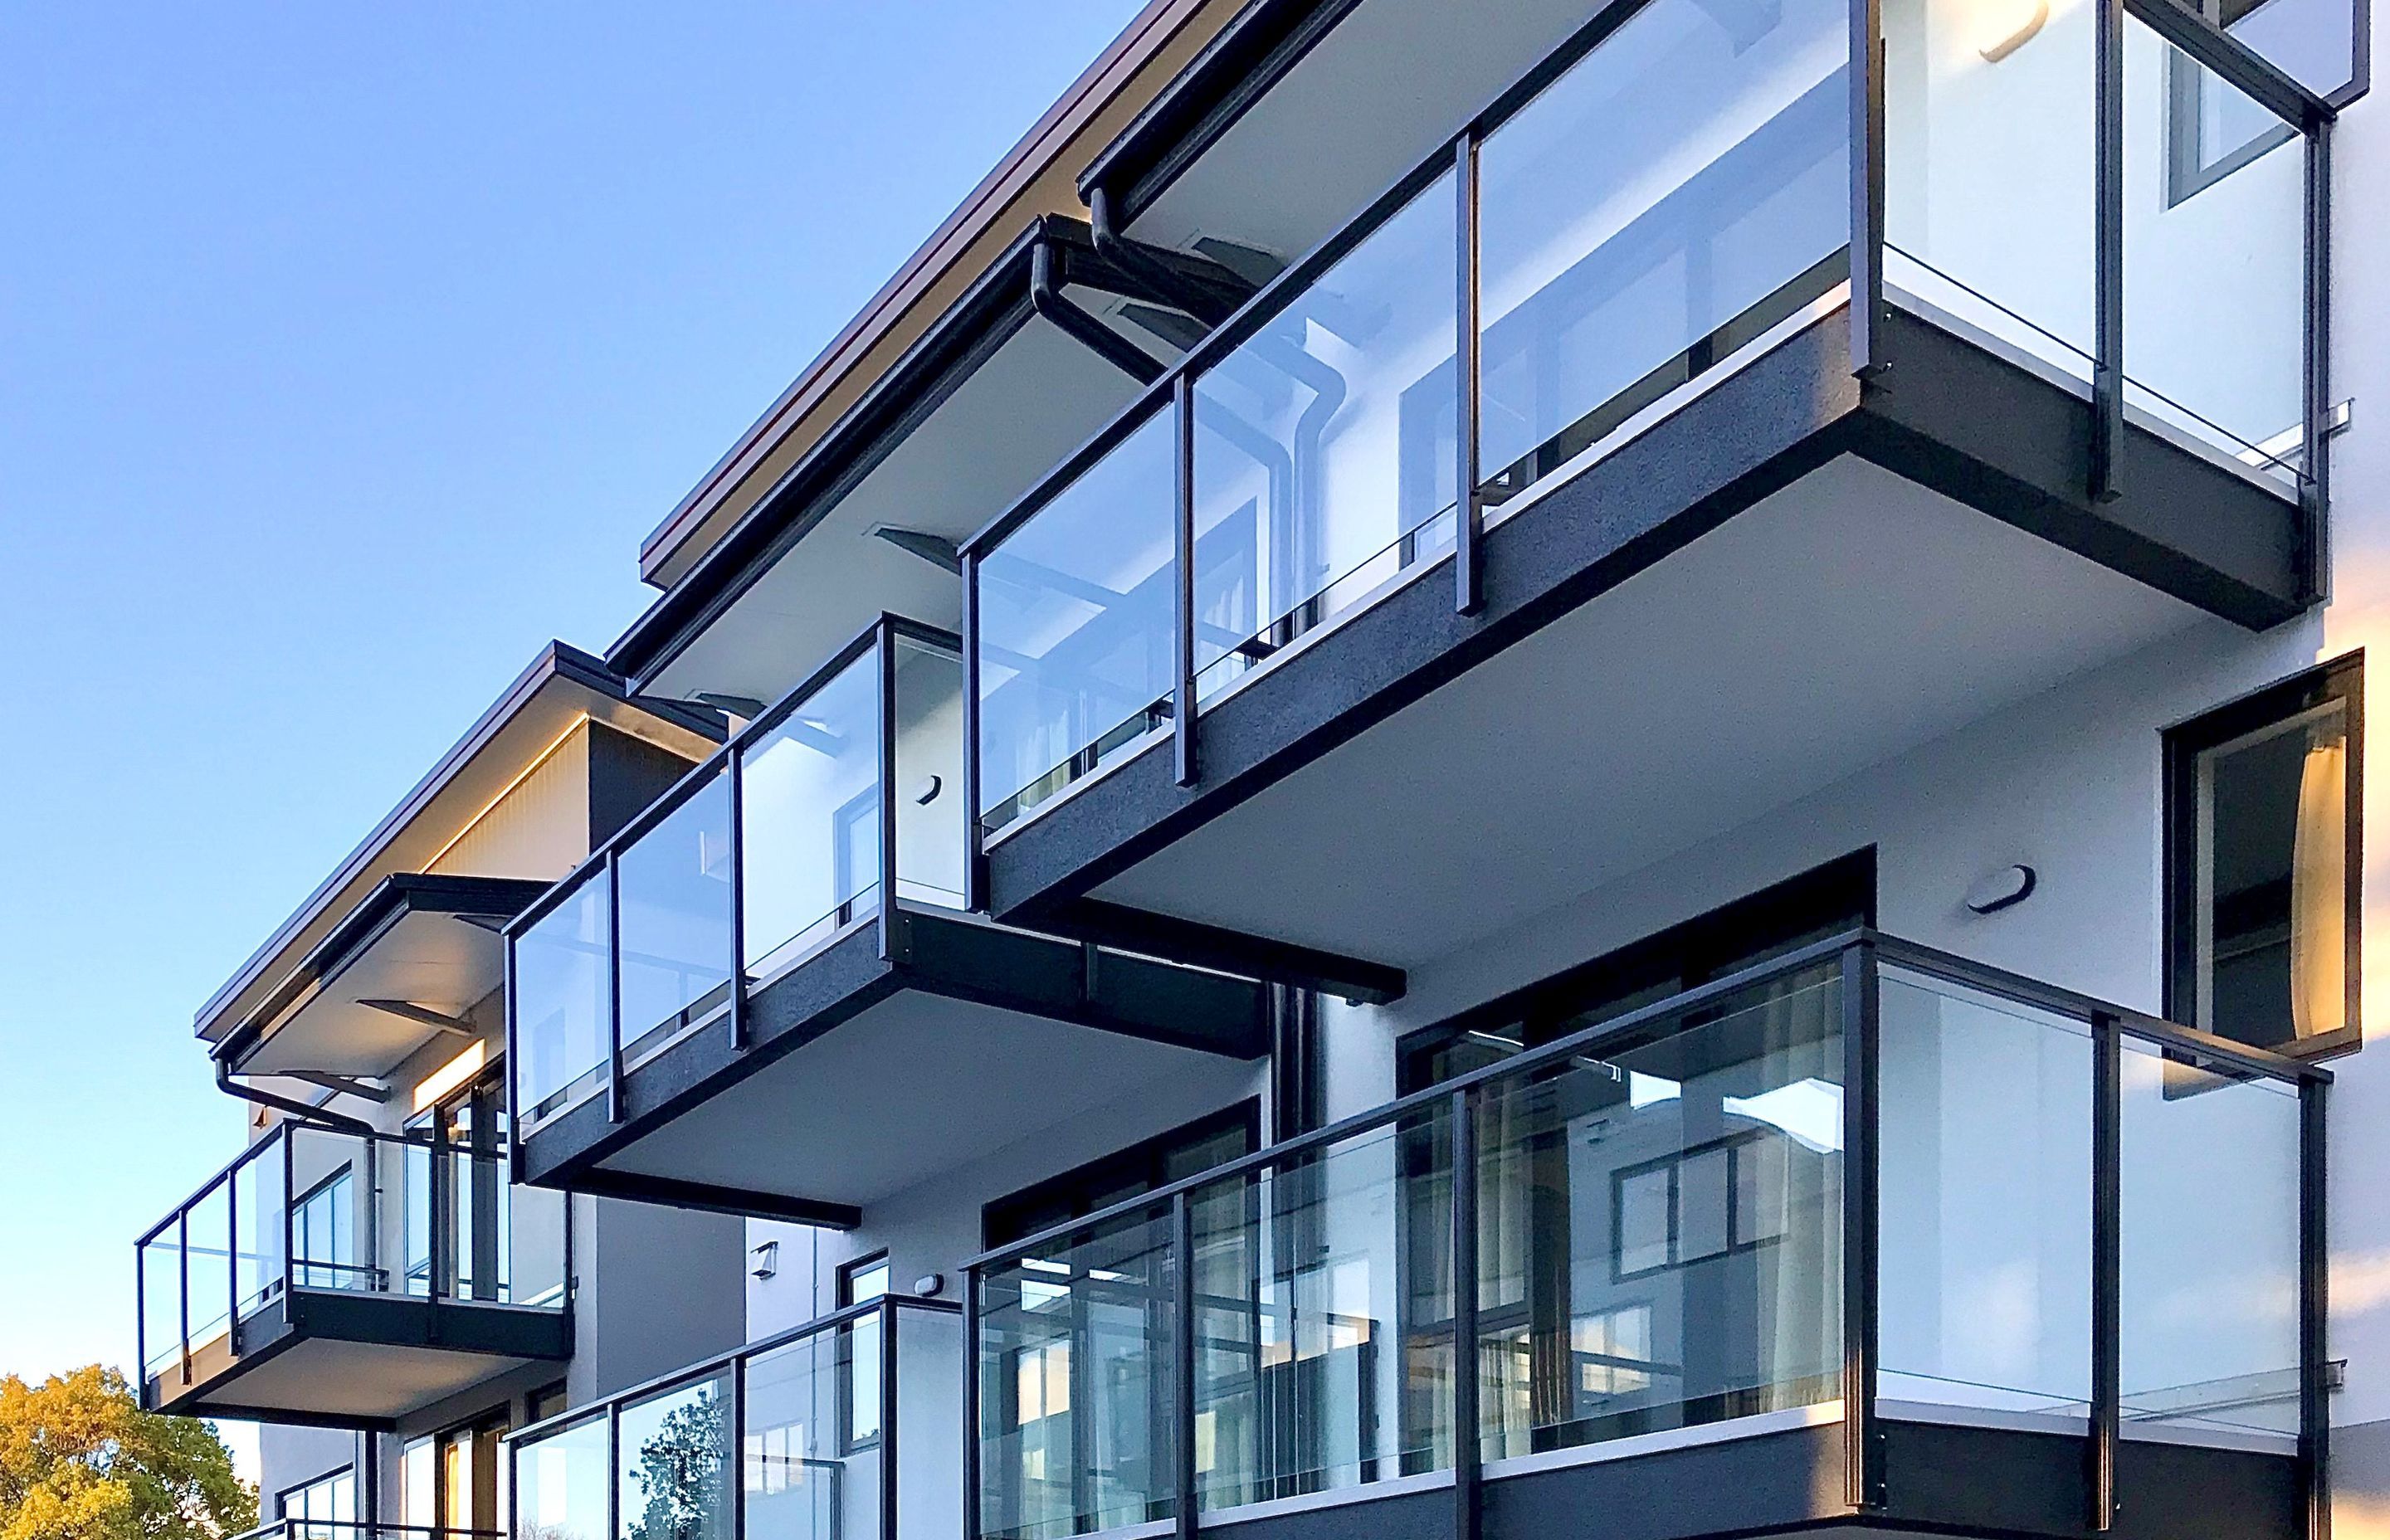 Specifying balustrade systems for the urban dwelling